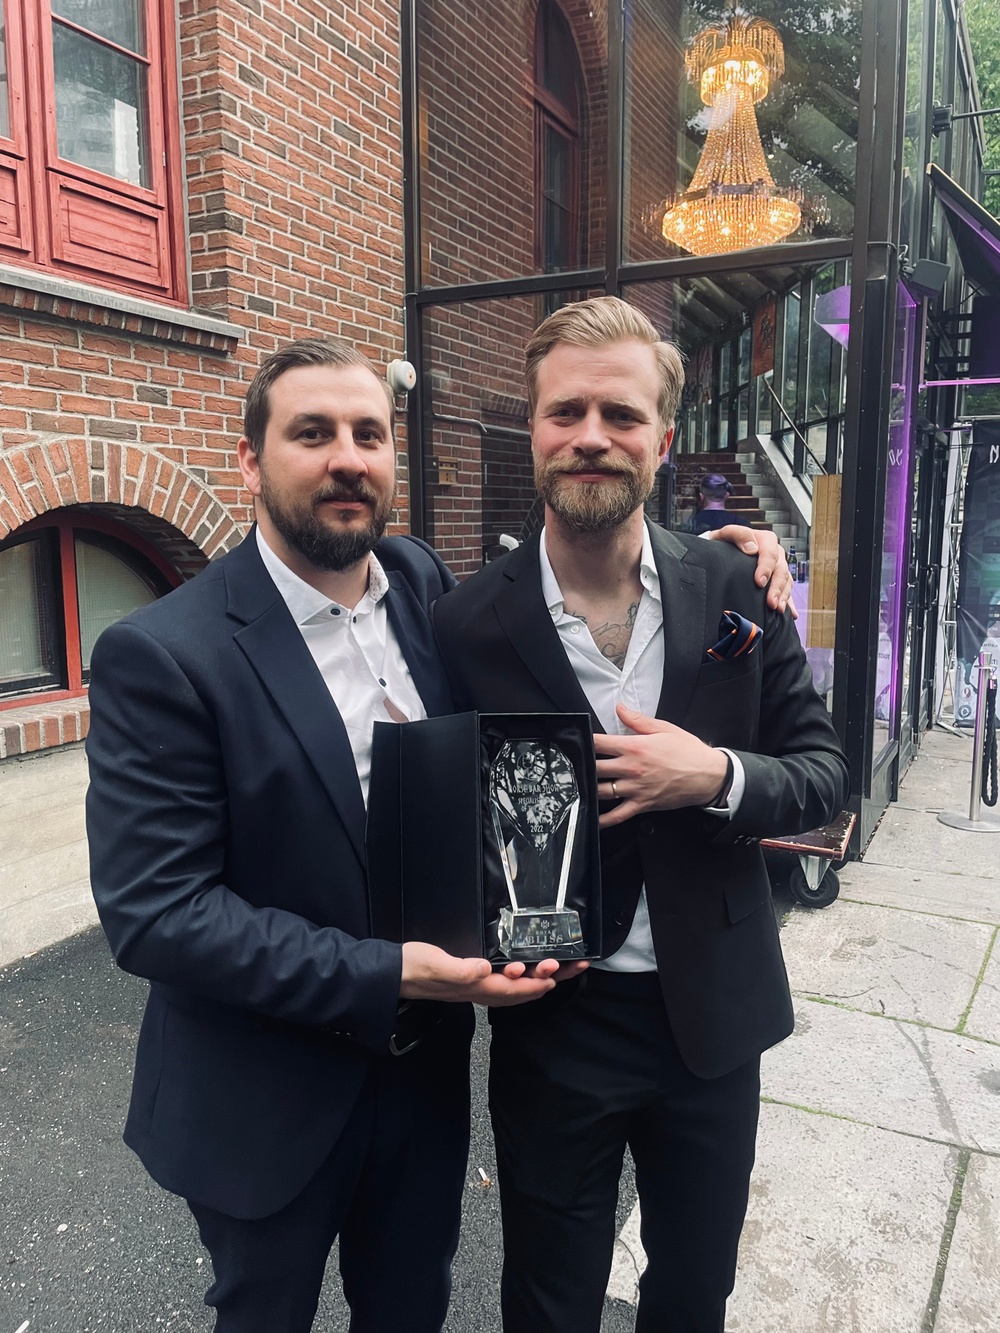 Dennis Anklev, Bar Manager och Linus Morgan, Food & Beverage Manager, at Hernö Gin Bar i Stockholm. Posing with Norse Bar Show award ”Specialist Bar of the Year in Sweden” in Oslo on JUne 7, 2022.